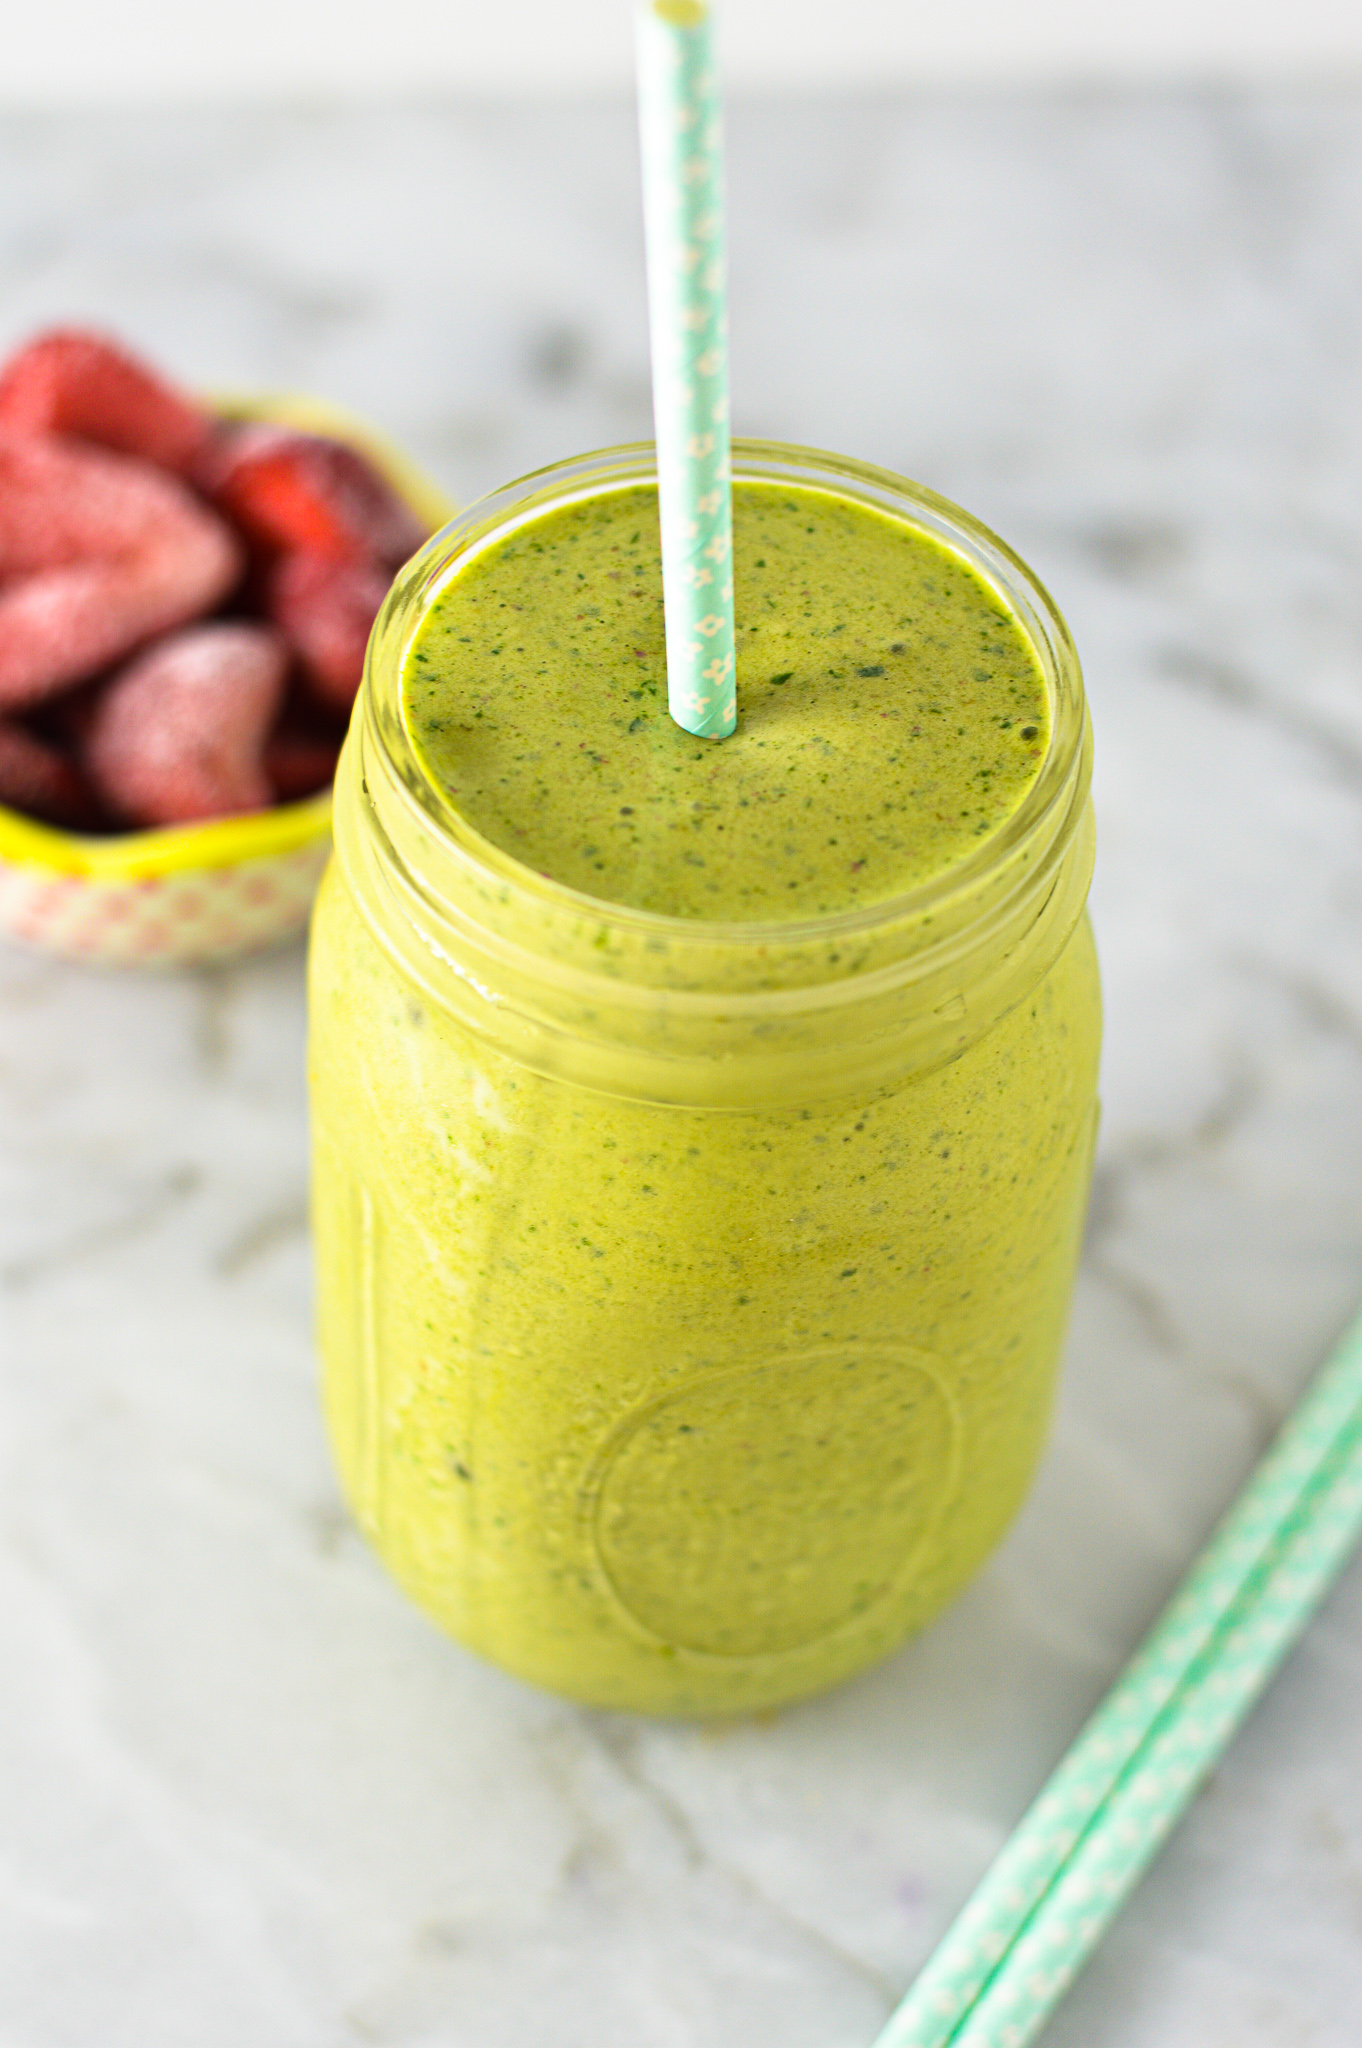 Strawberry Banana Green Smoothie | A Taste of Madness